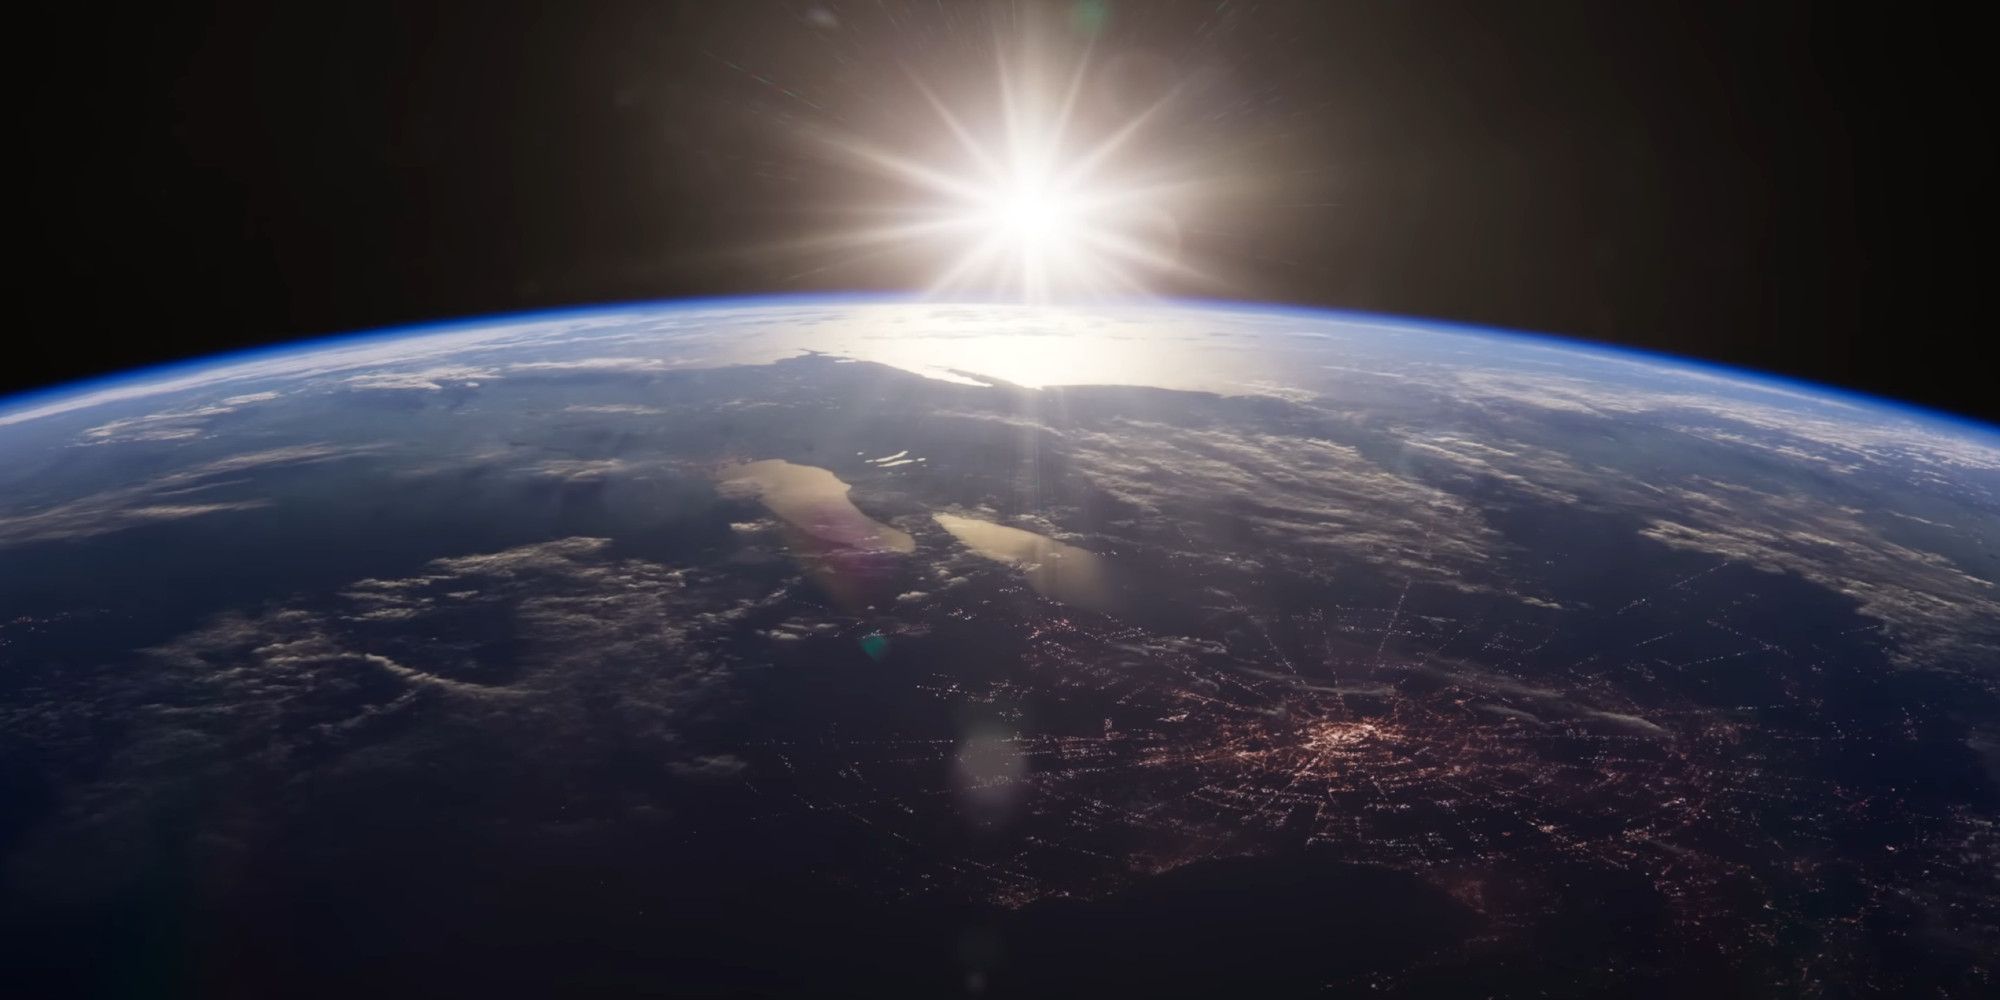 Super Earth from space, with the sun poking out over the horizon of the planet